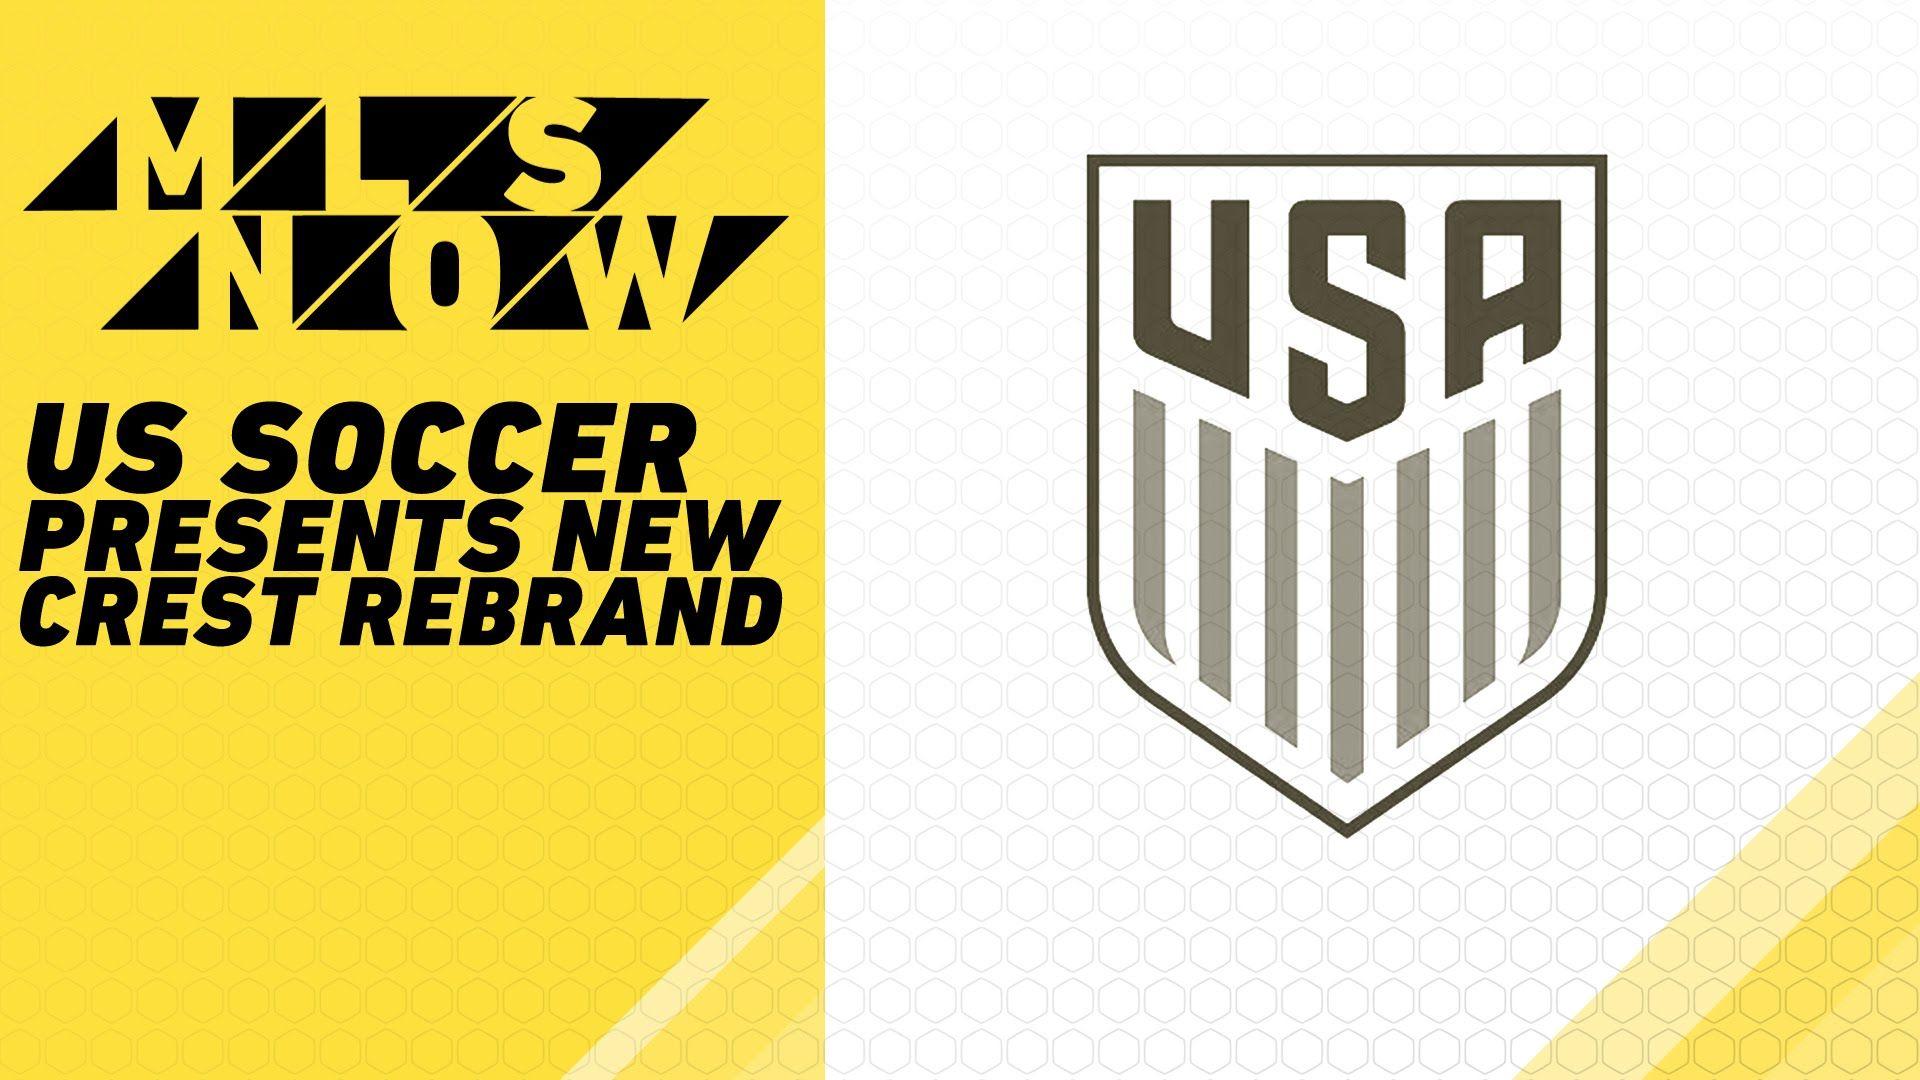 Is the new US Soccer crest an improvement?